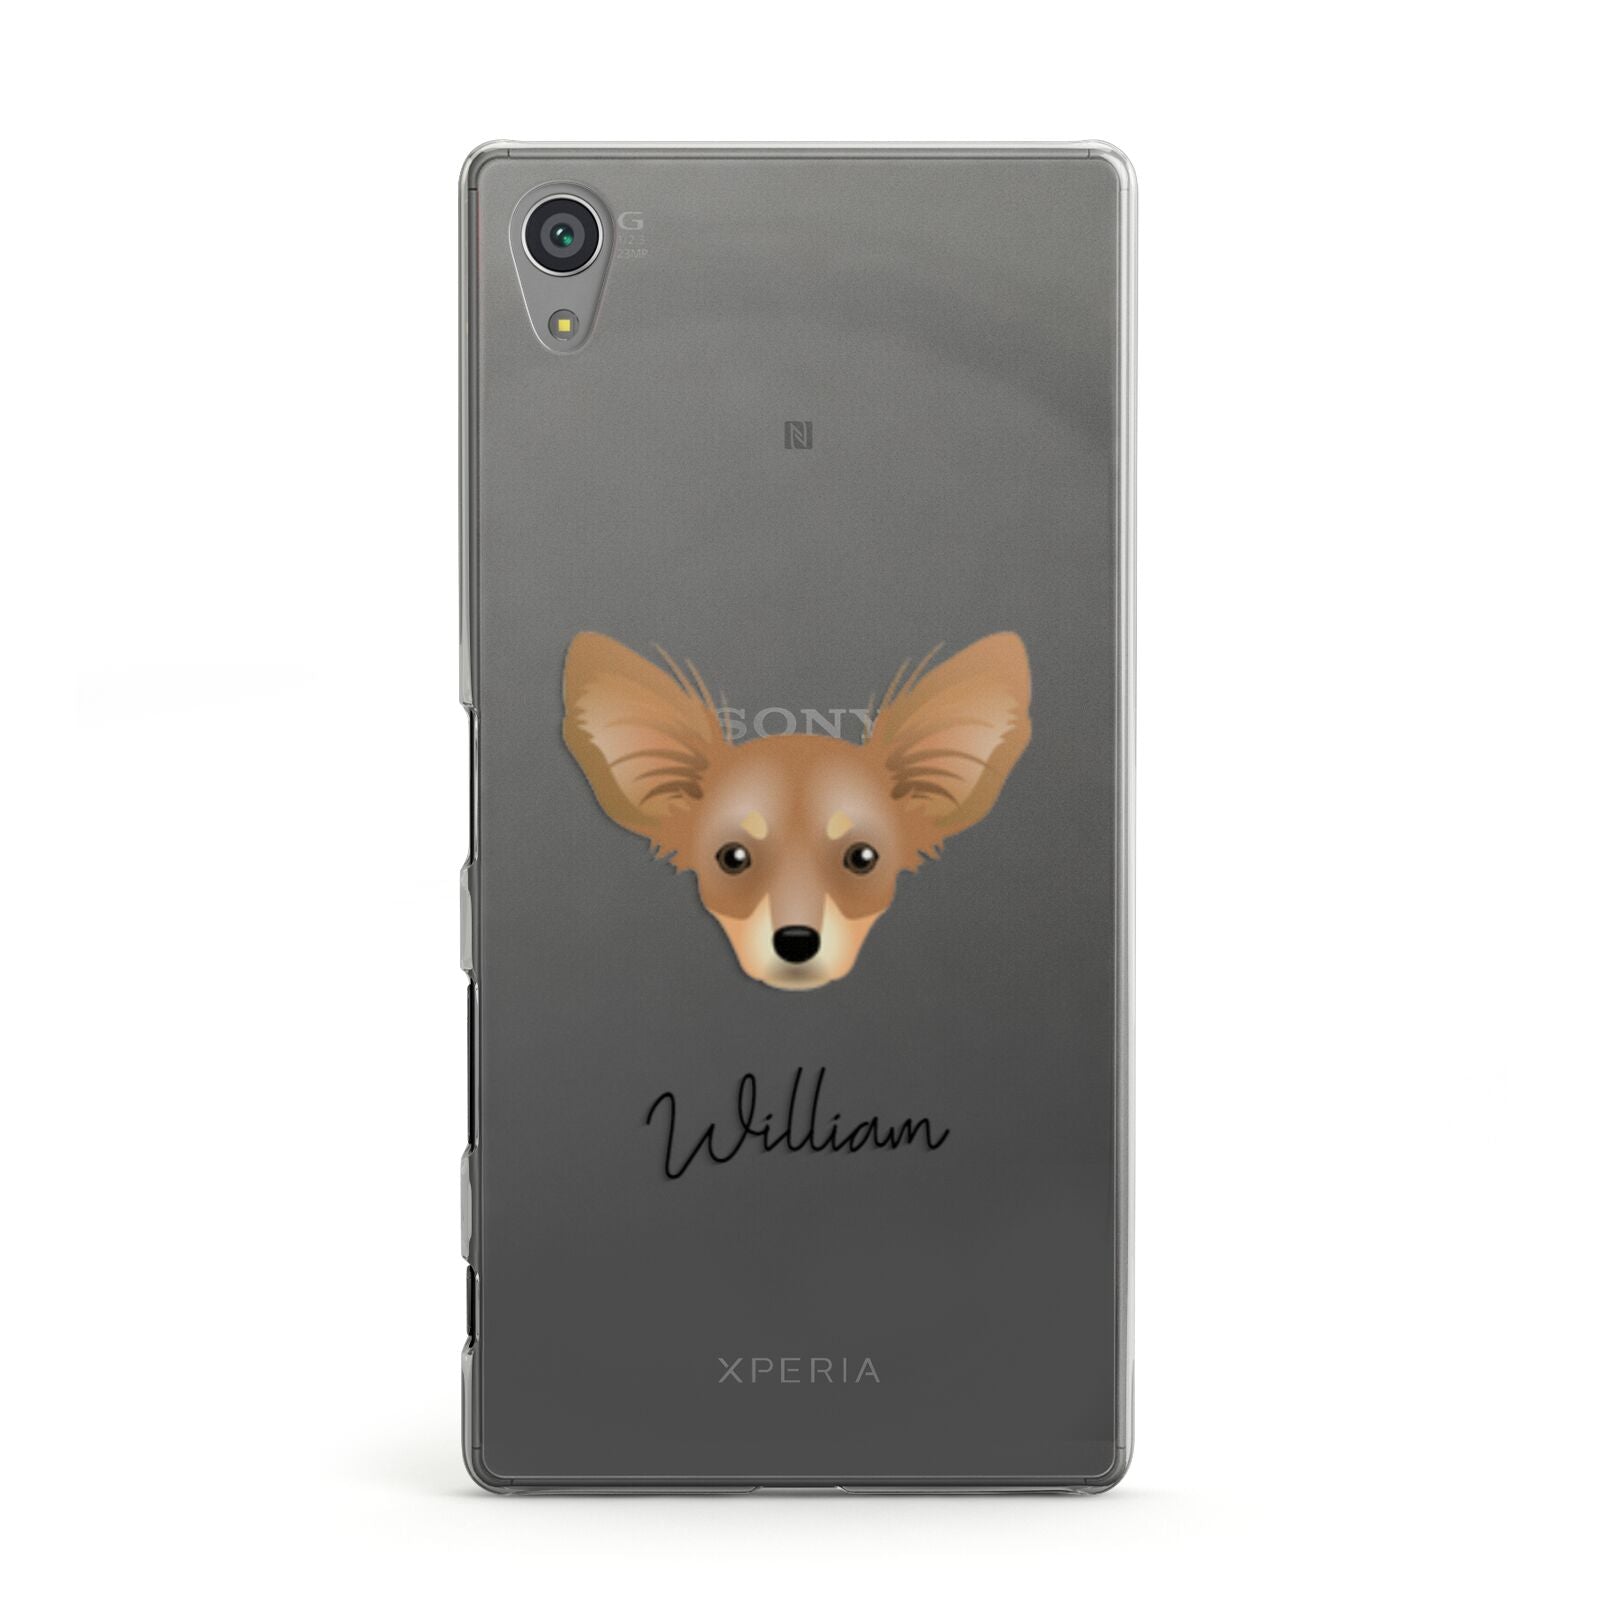 Russian Toy Personalised Sony Xperia Case